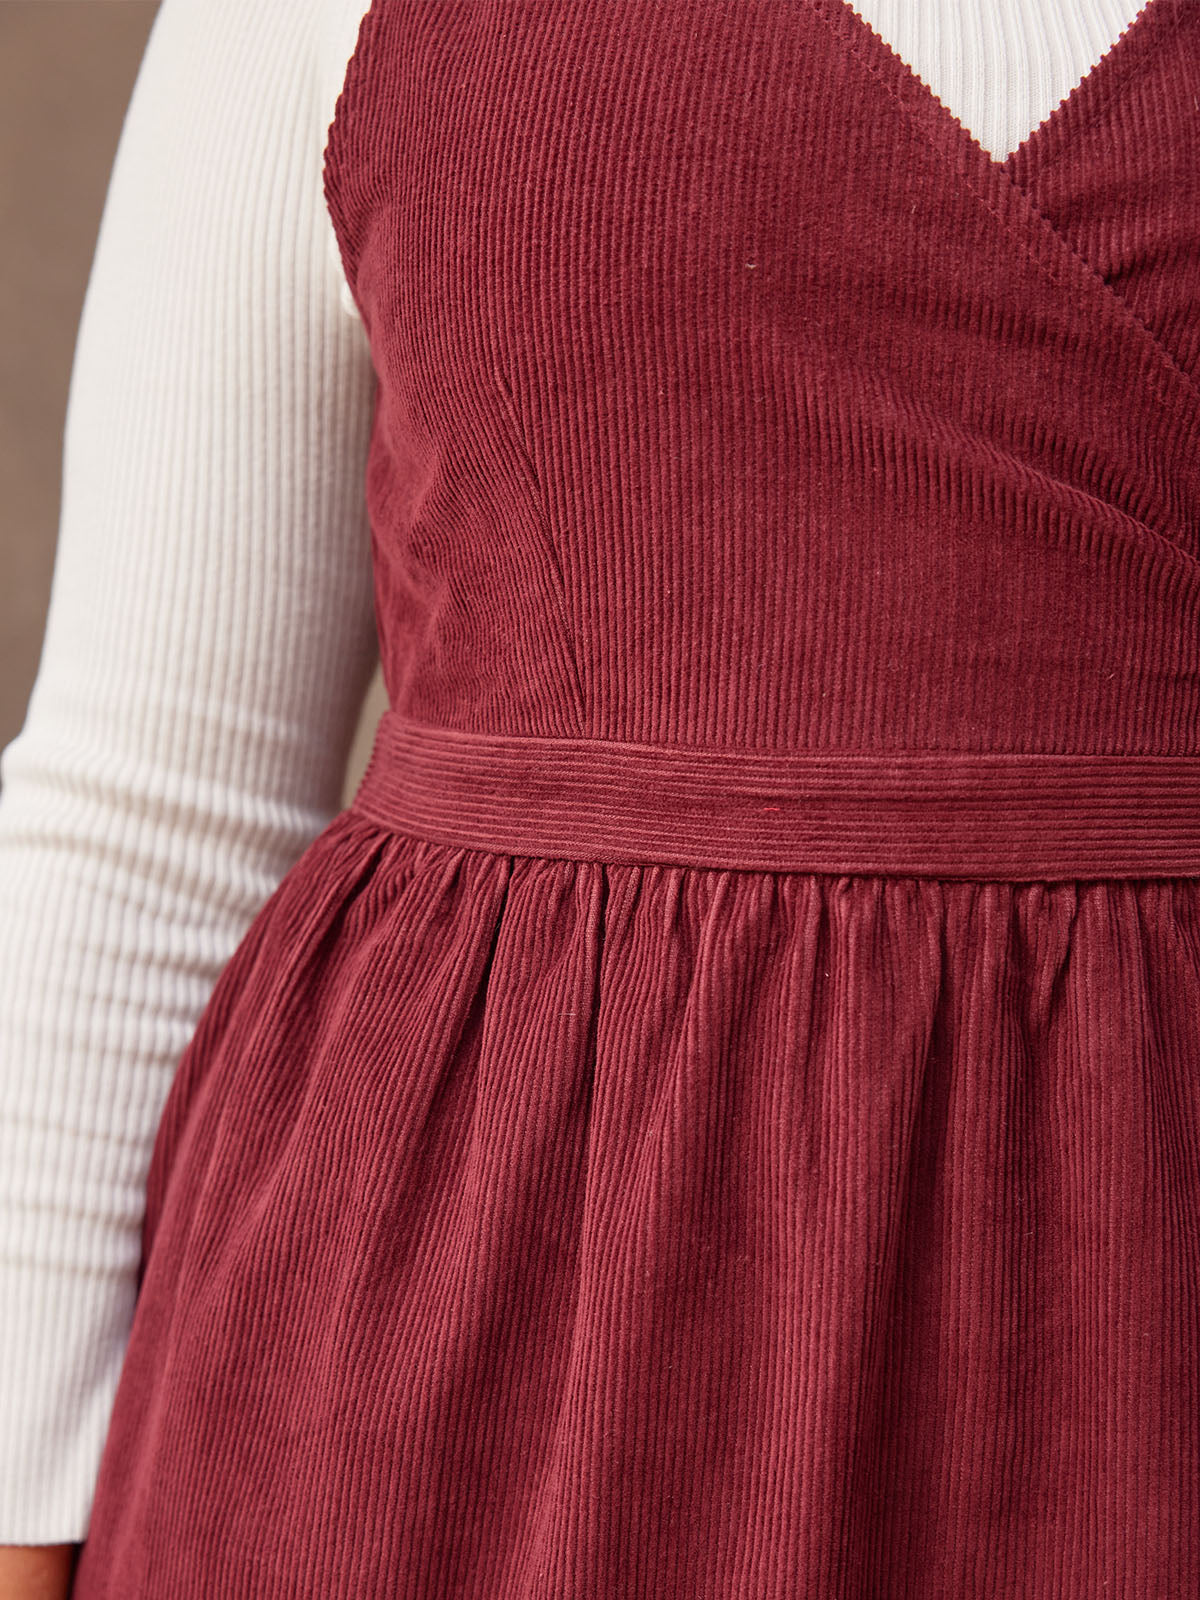 A closeup of the front of the Ally dress, showing the crossover front and the waistband detail.